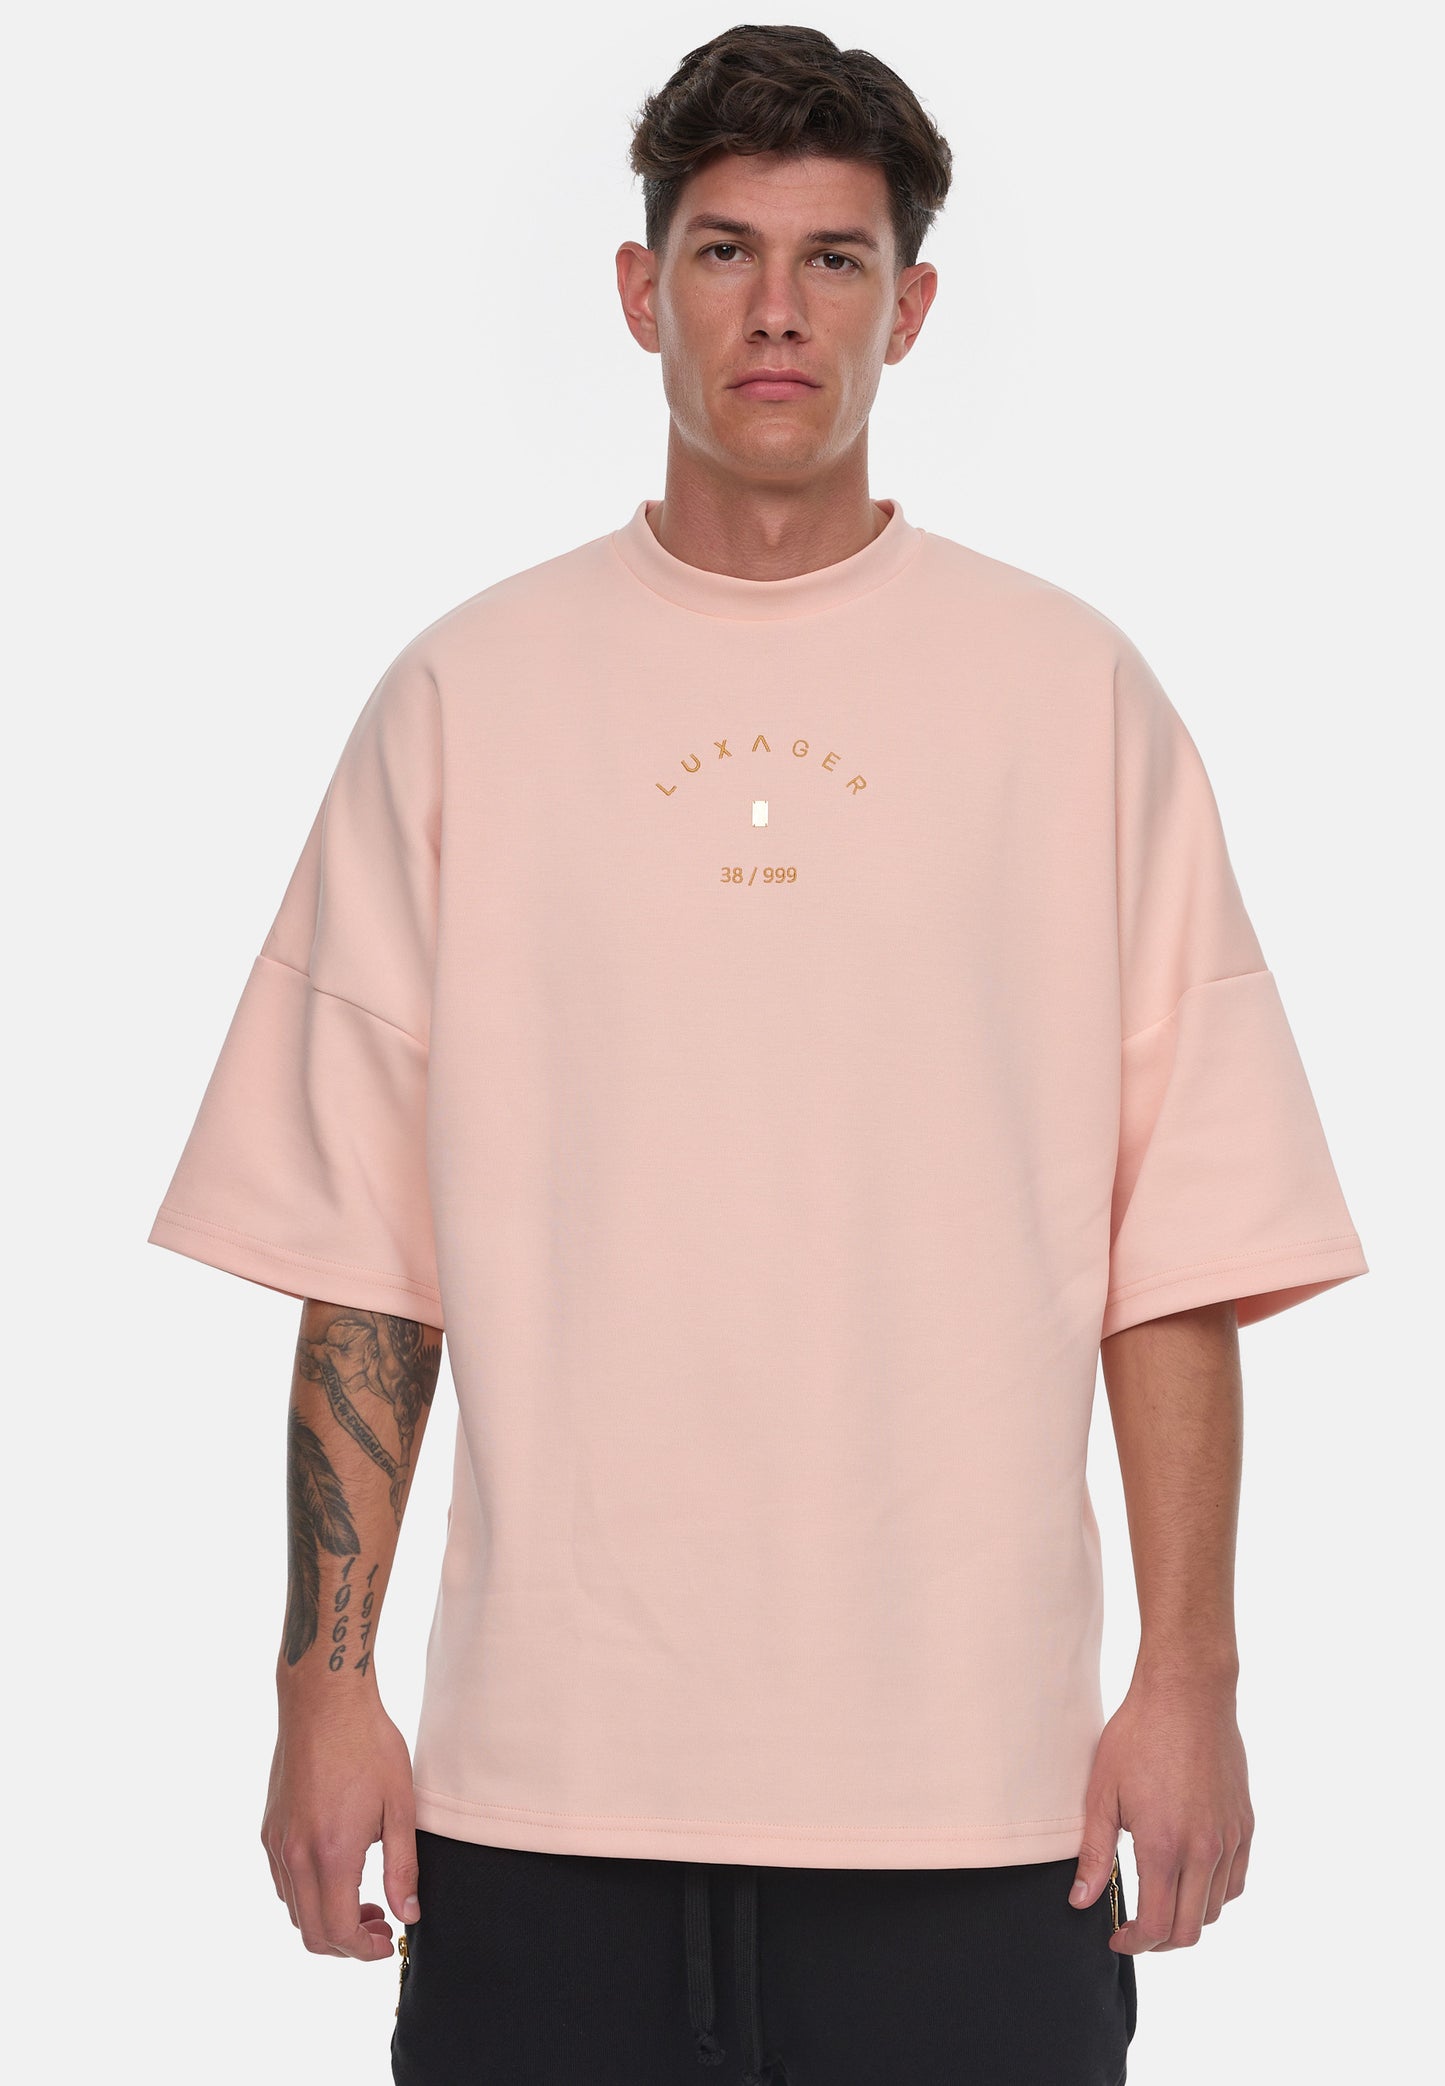 LUXAGER T-Shirt Oversize salmon pink